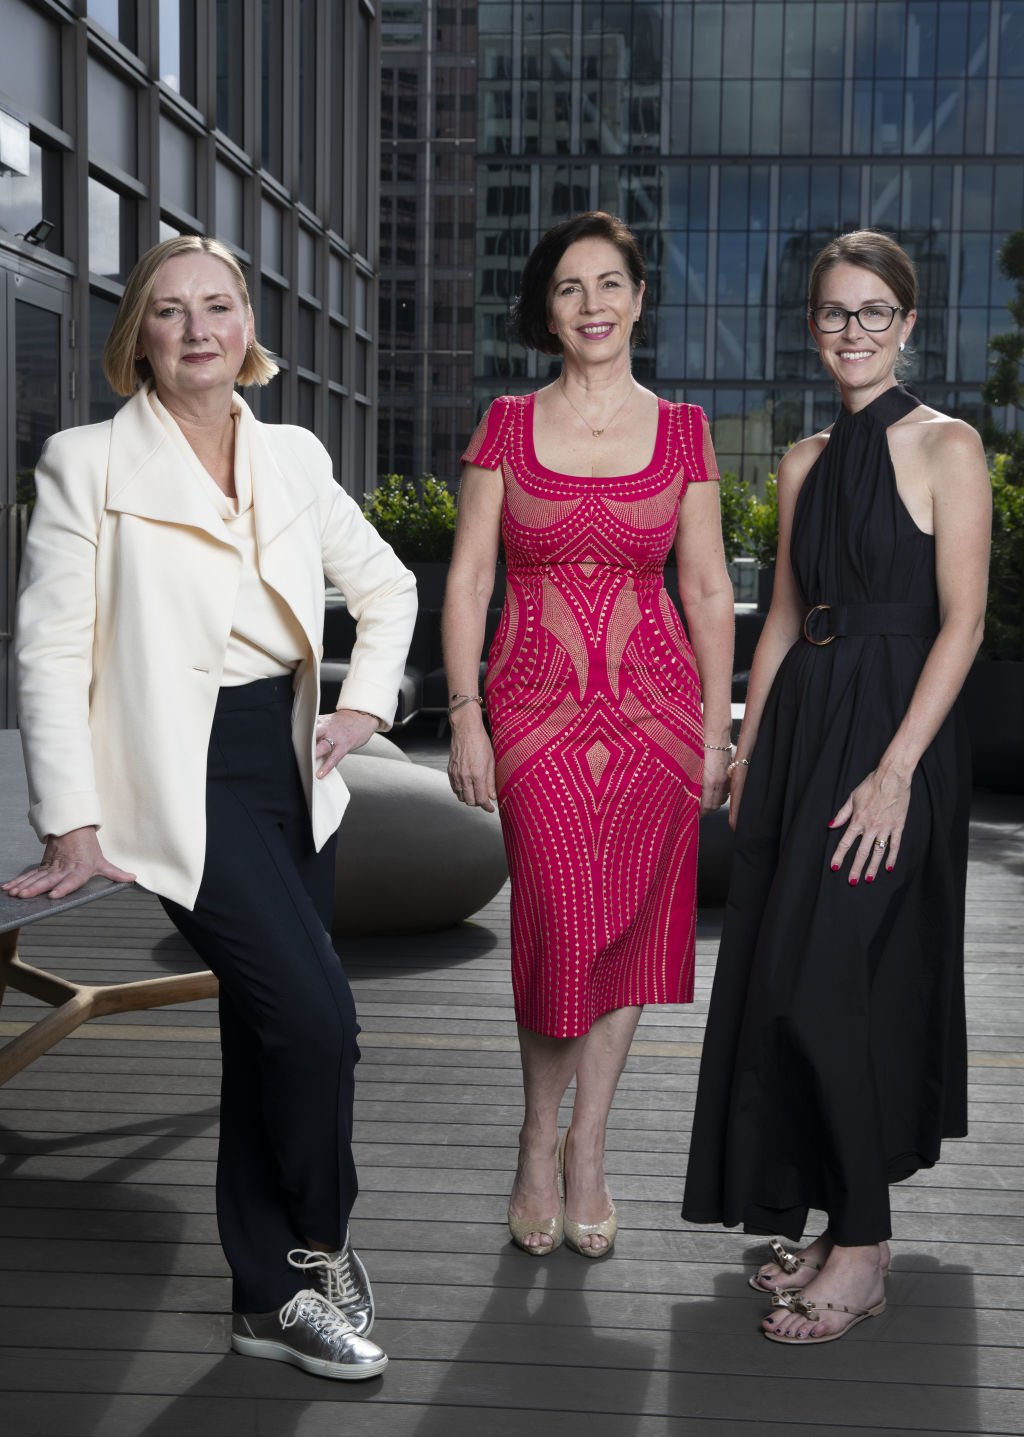 Susan Lloyd Hurwitz, Leanne Pilkington and Alison Mirams have played a leading role promoting gender equity within the property sector. Photo: Jessica Hromas